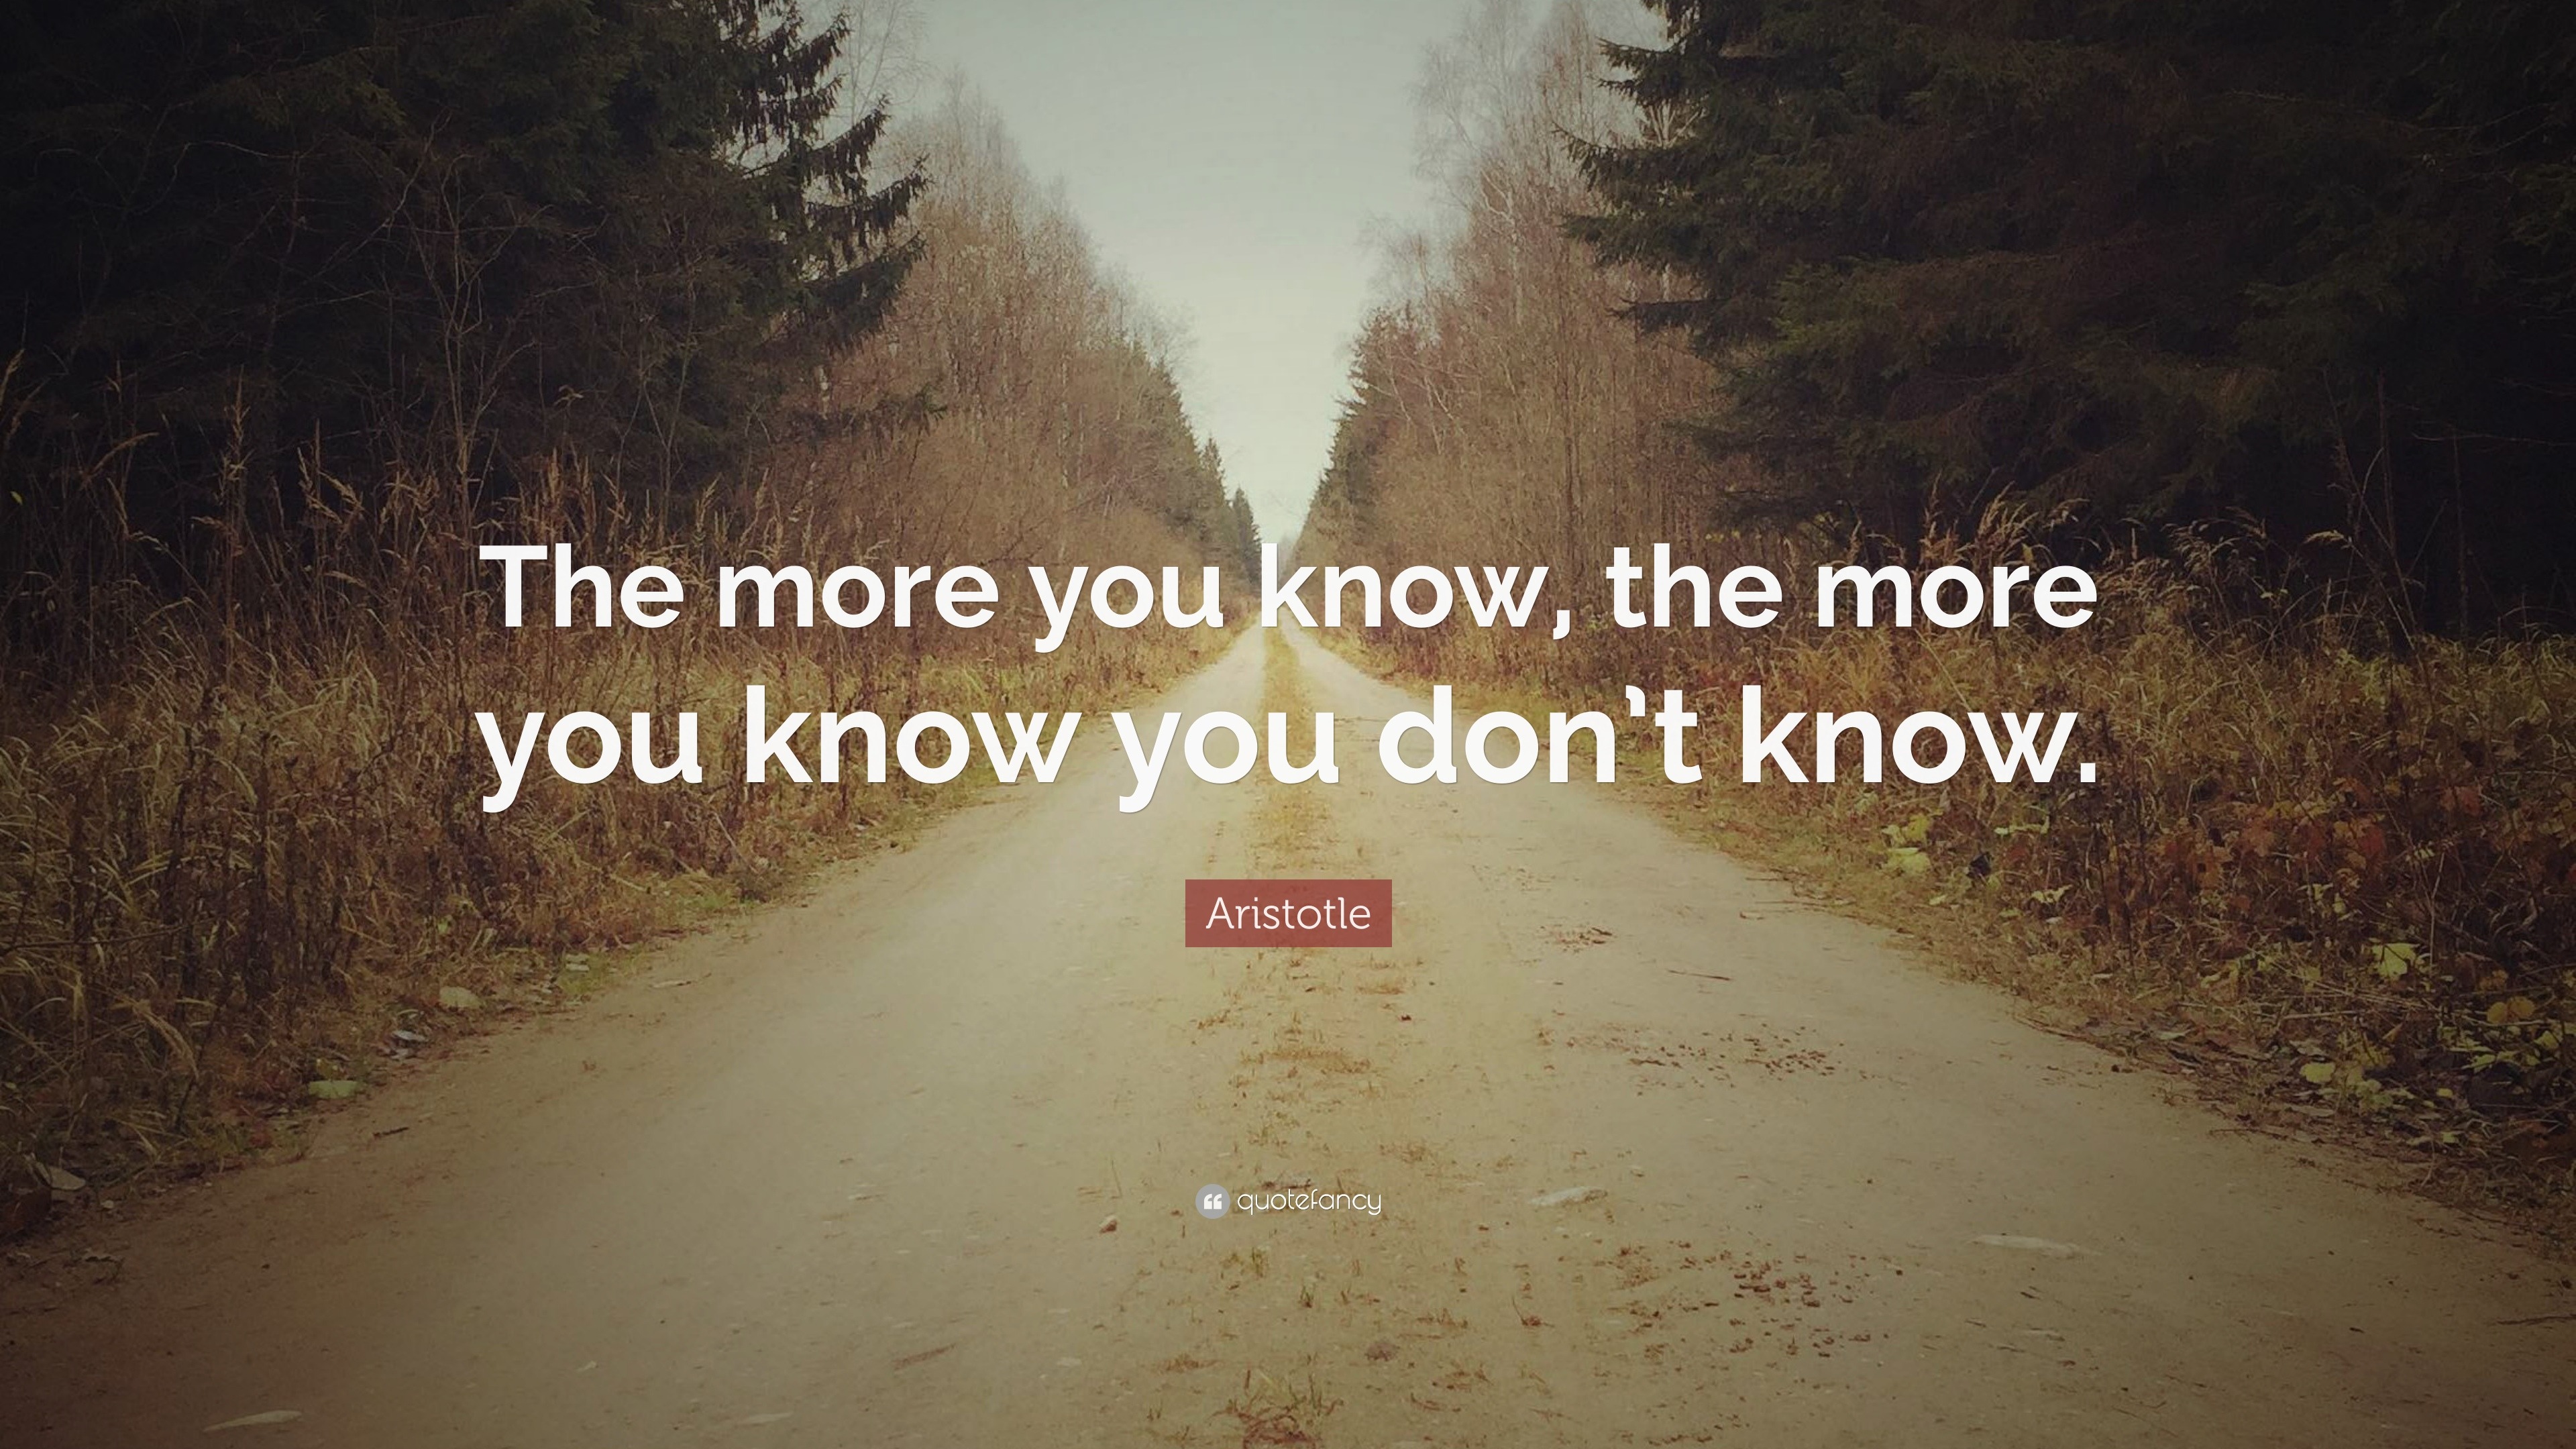 Aristotle Quote: "The more you know, the more you know you ...